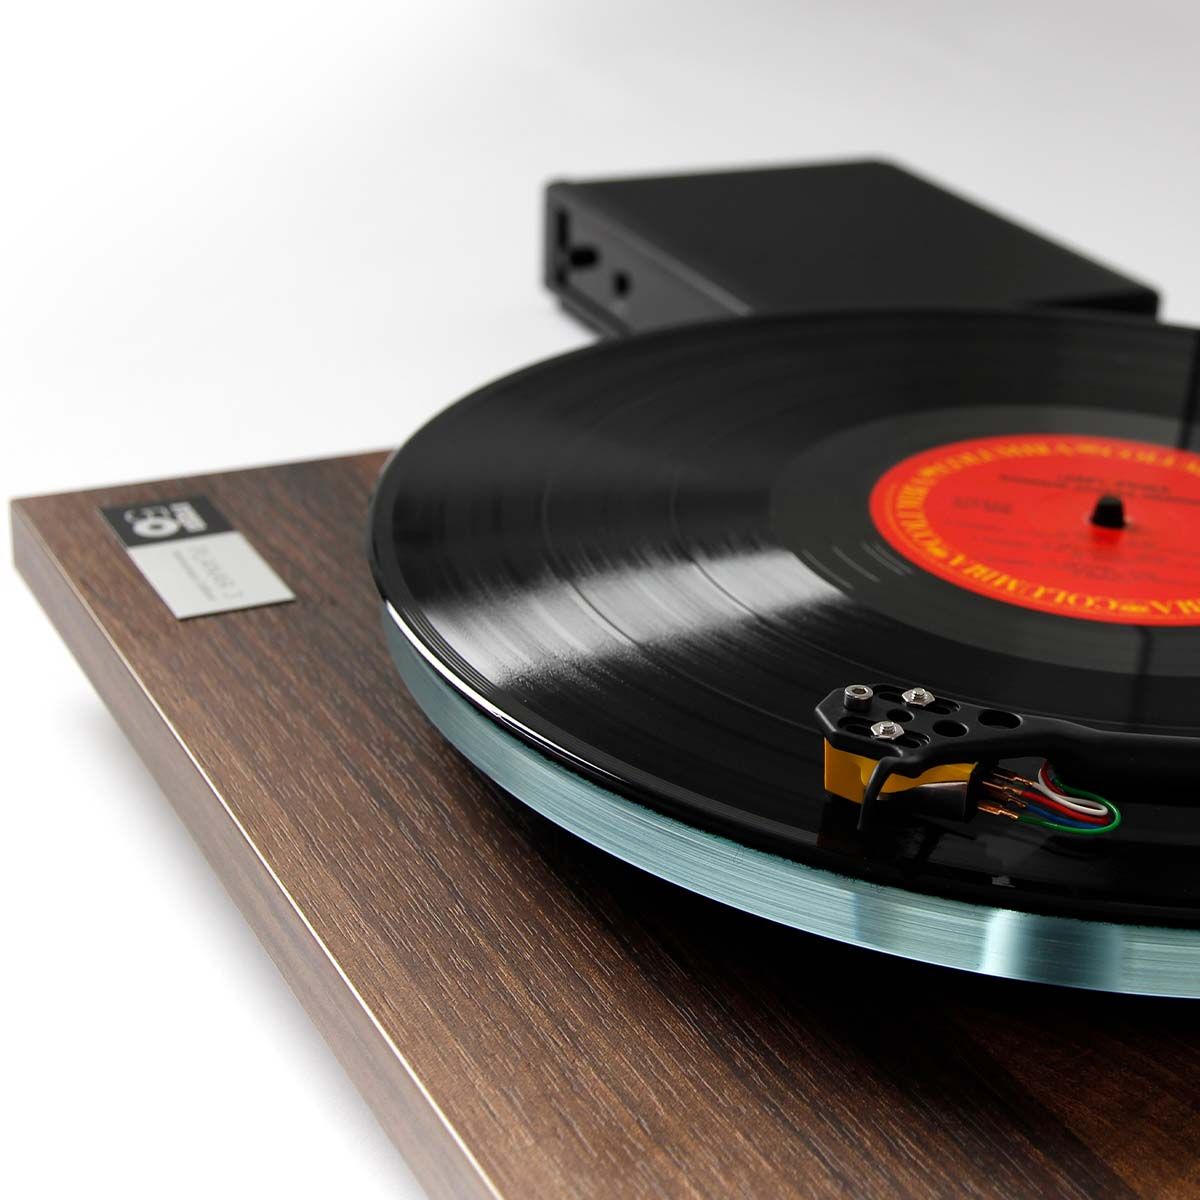 Rega Planar 3 50th Anniversary Edition Turntable - Walnut angled front view with record playing and Neo PSU